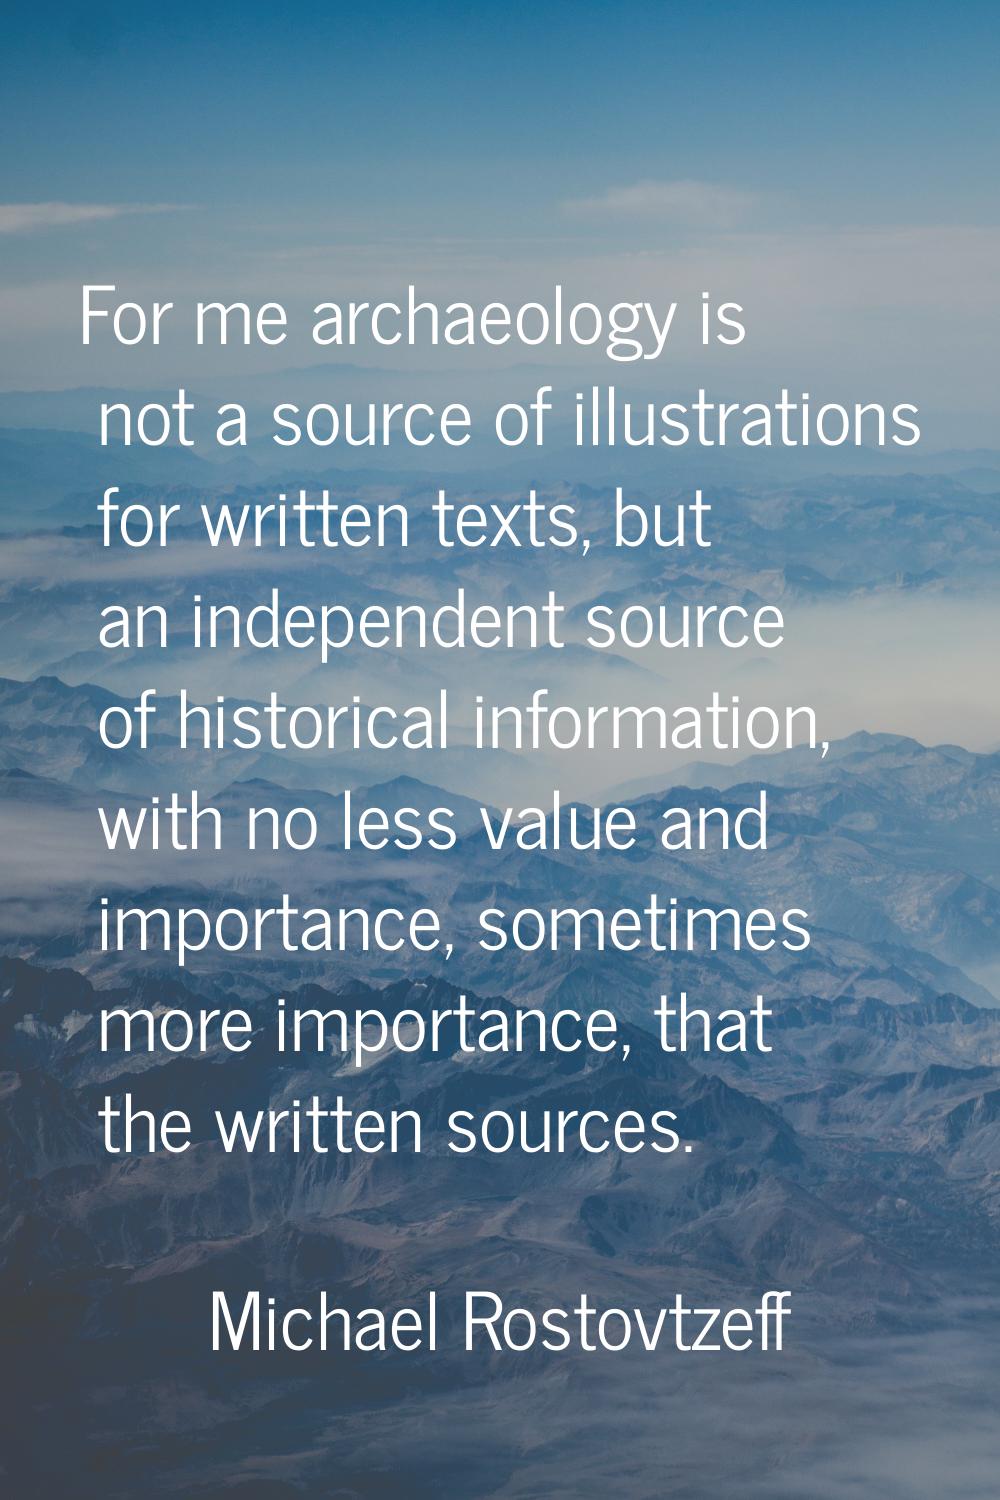 For me archaeology is not a source of illustrations for written texts, but an independent source of